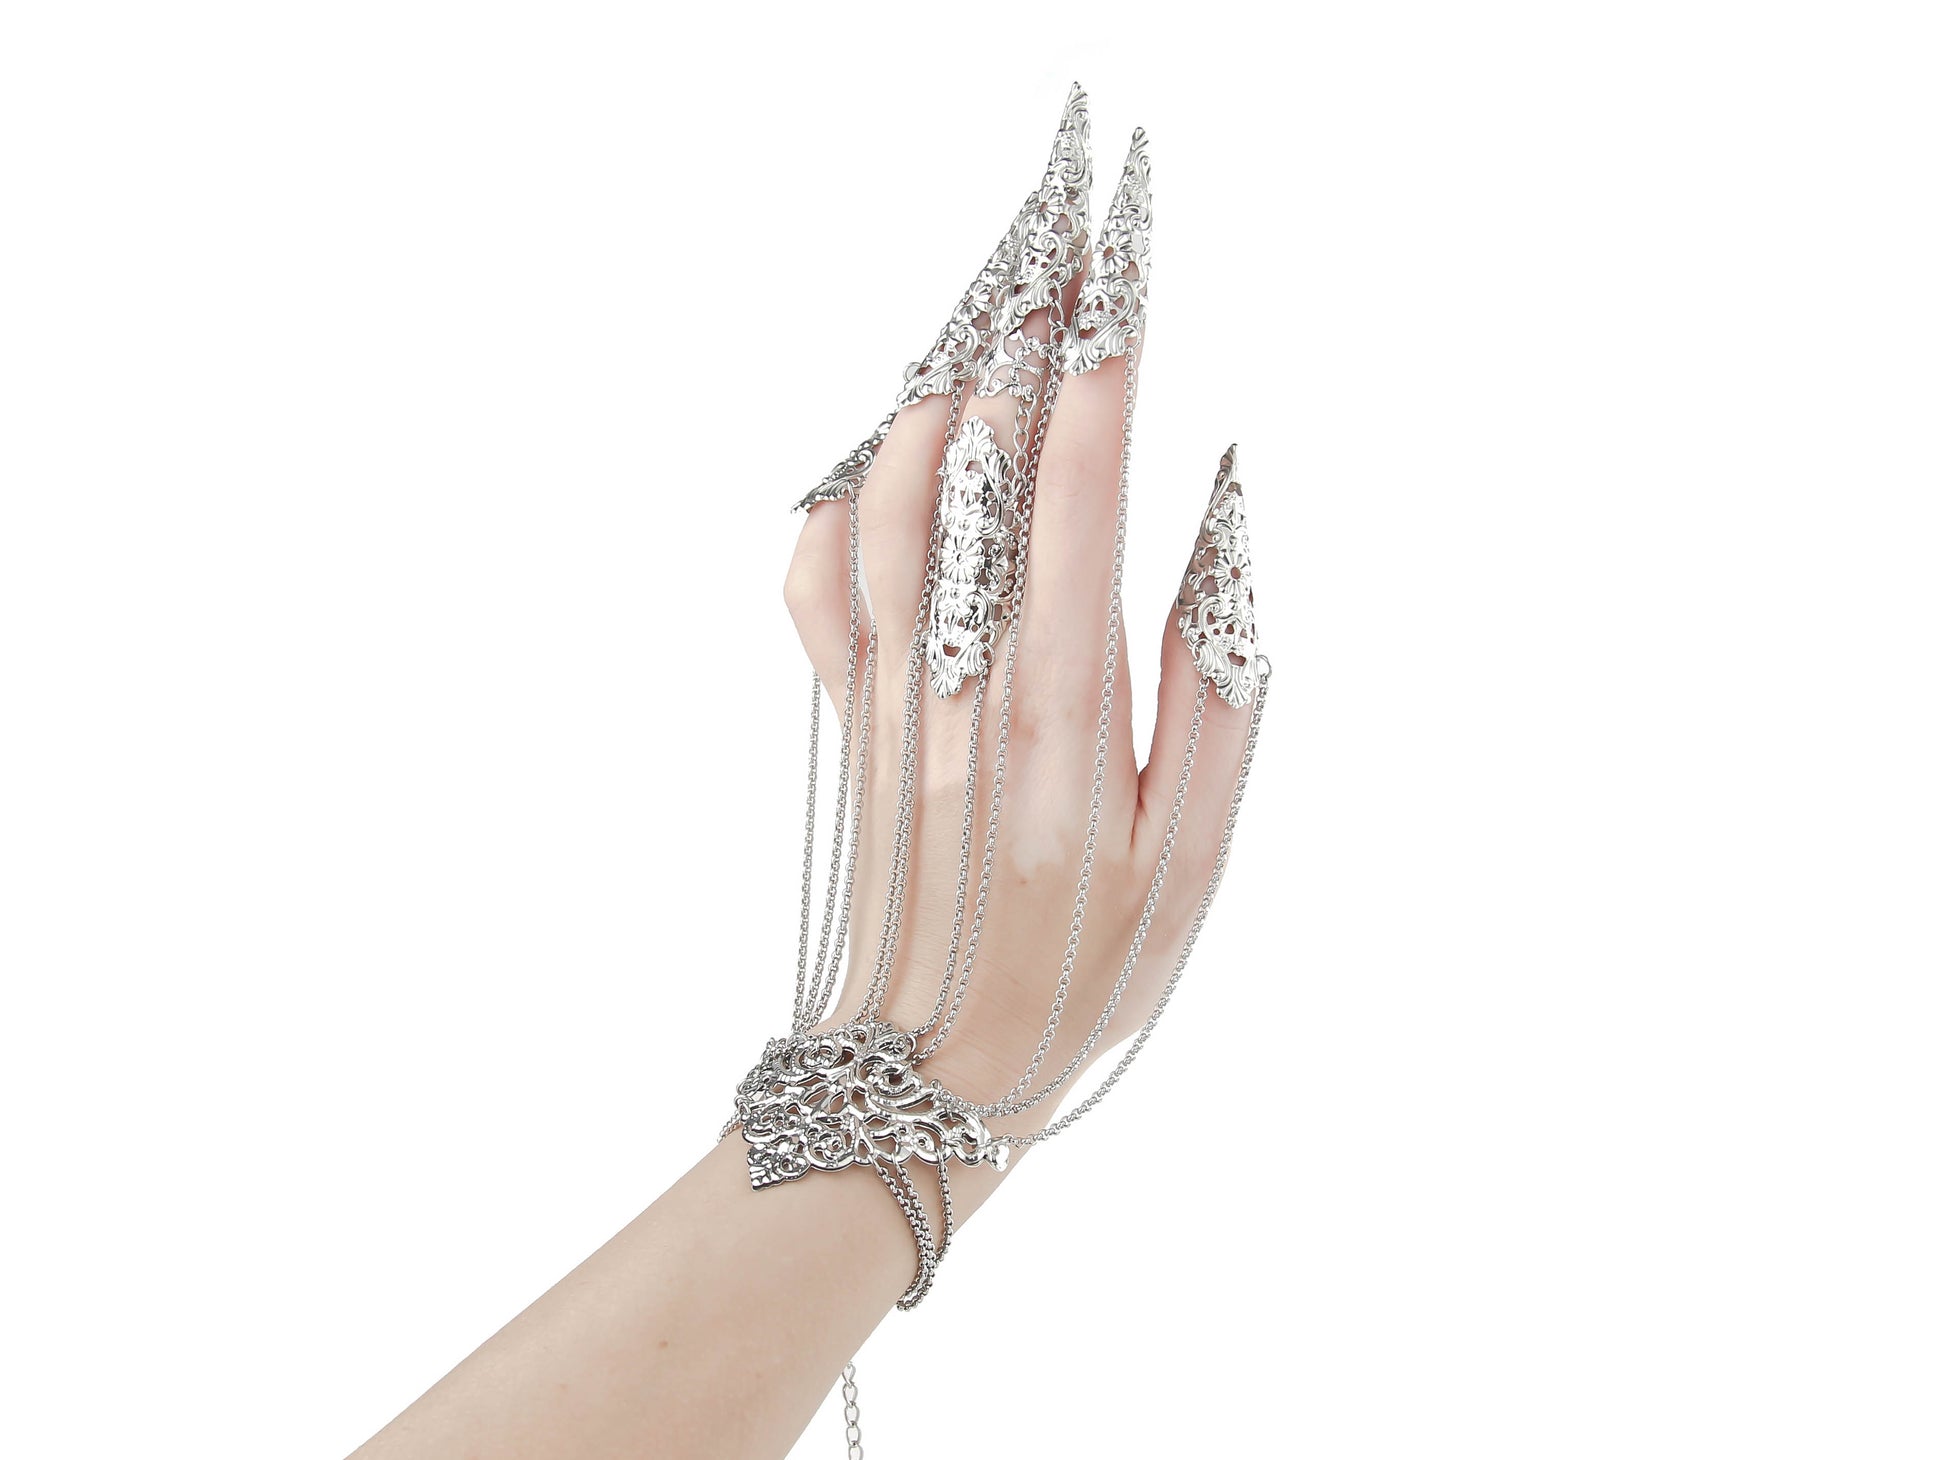 A hand adorned with a Myril Jewels chain bracelet with claws presents an image of neo-goth luxury. Perfect for gothic-chic aficionados and those seeking a unique addition to their Halloween or rave party jewelry collection, these claw rings make a bold statement.